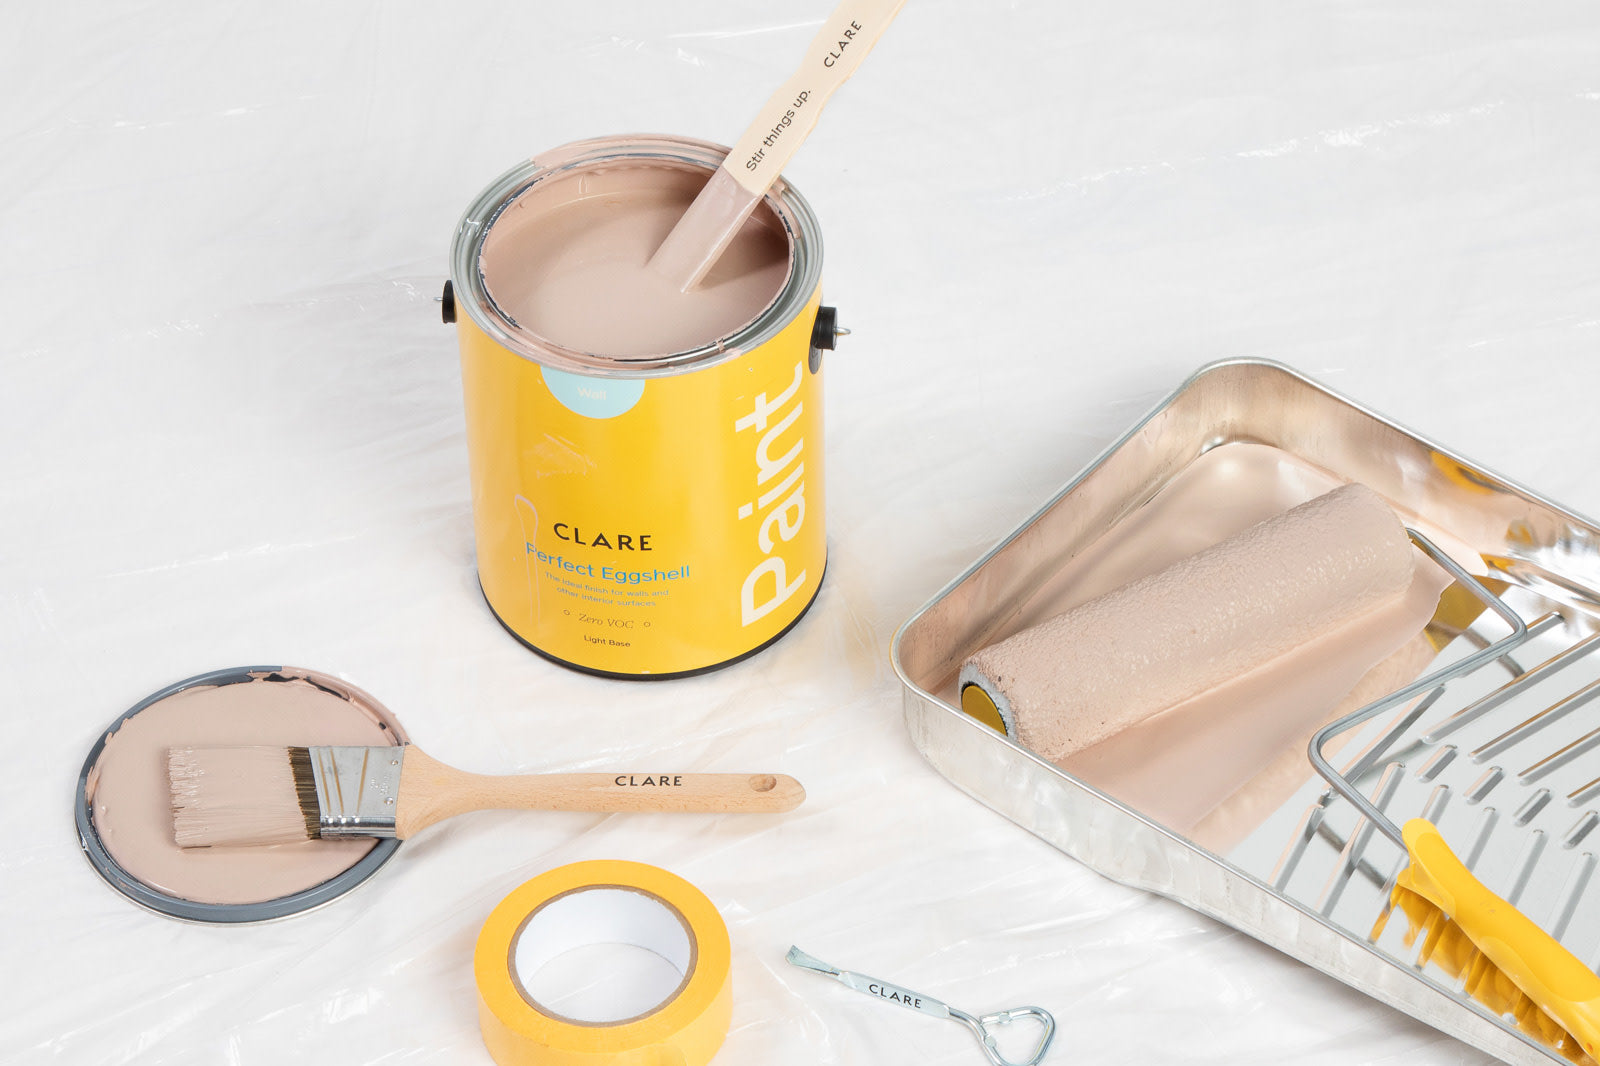 Looking for the perfect pink paint? These popular shades are the best pink paint colors. From soft to stand out, find the best pink paint color for your space.